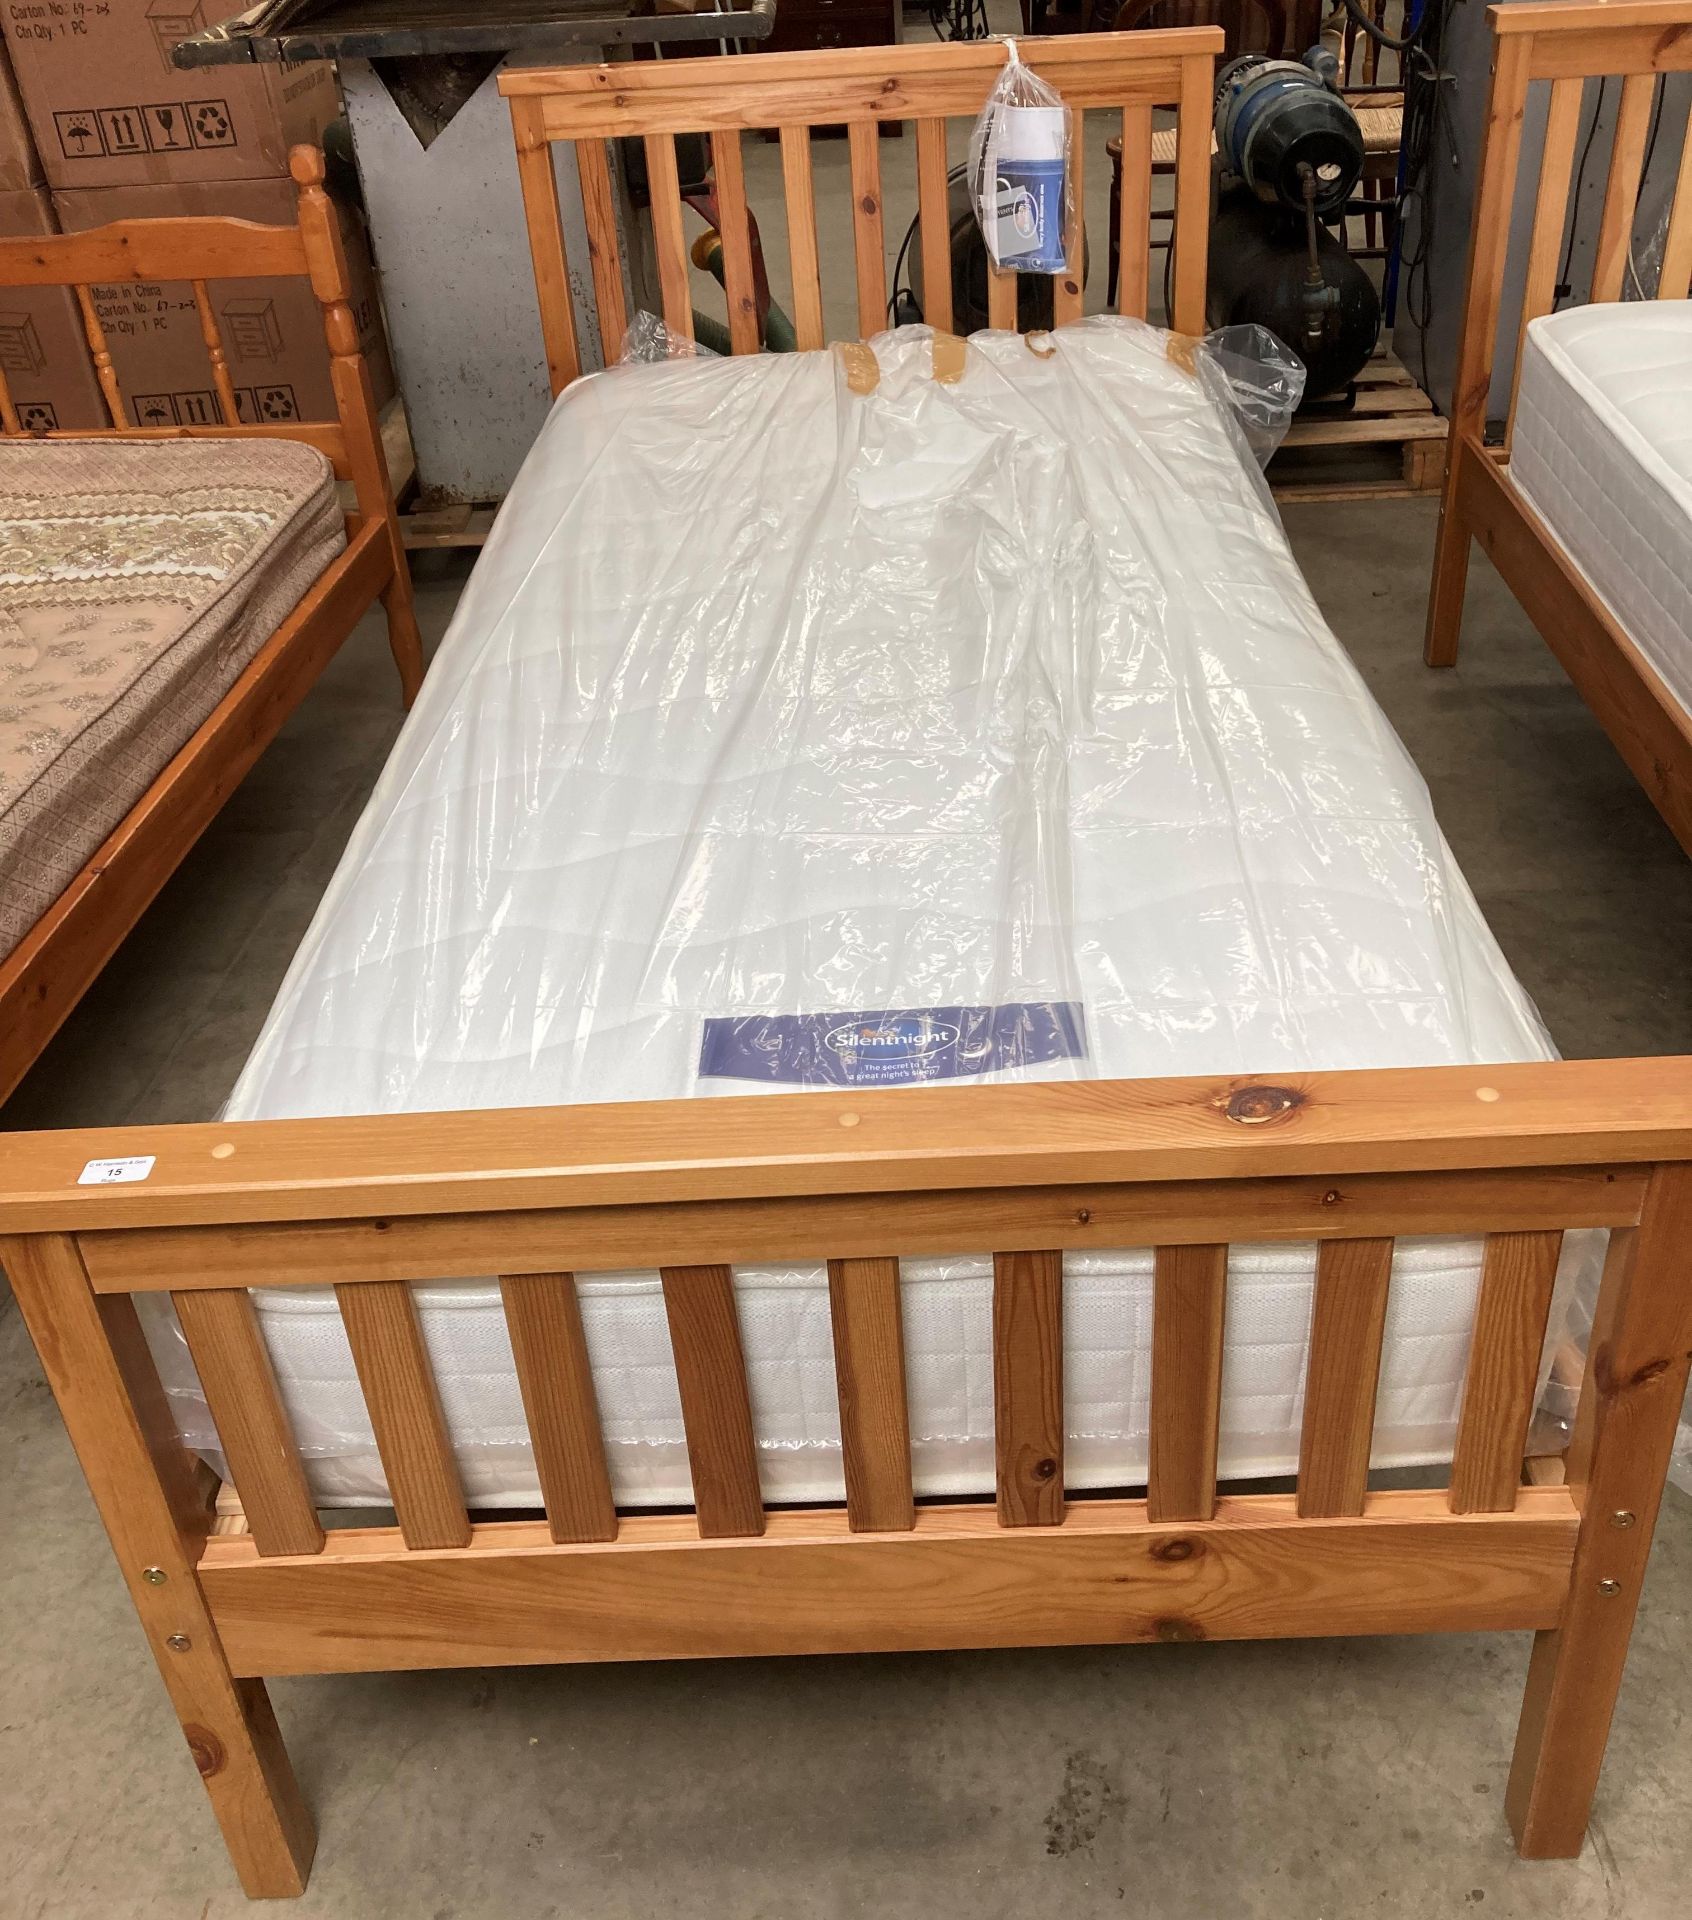 A pine 3' single bed and Silent Night pocket essentials 1000 mattress